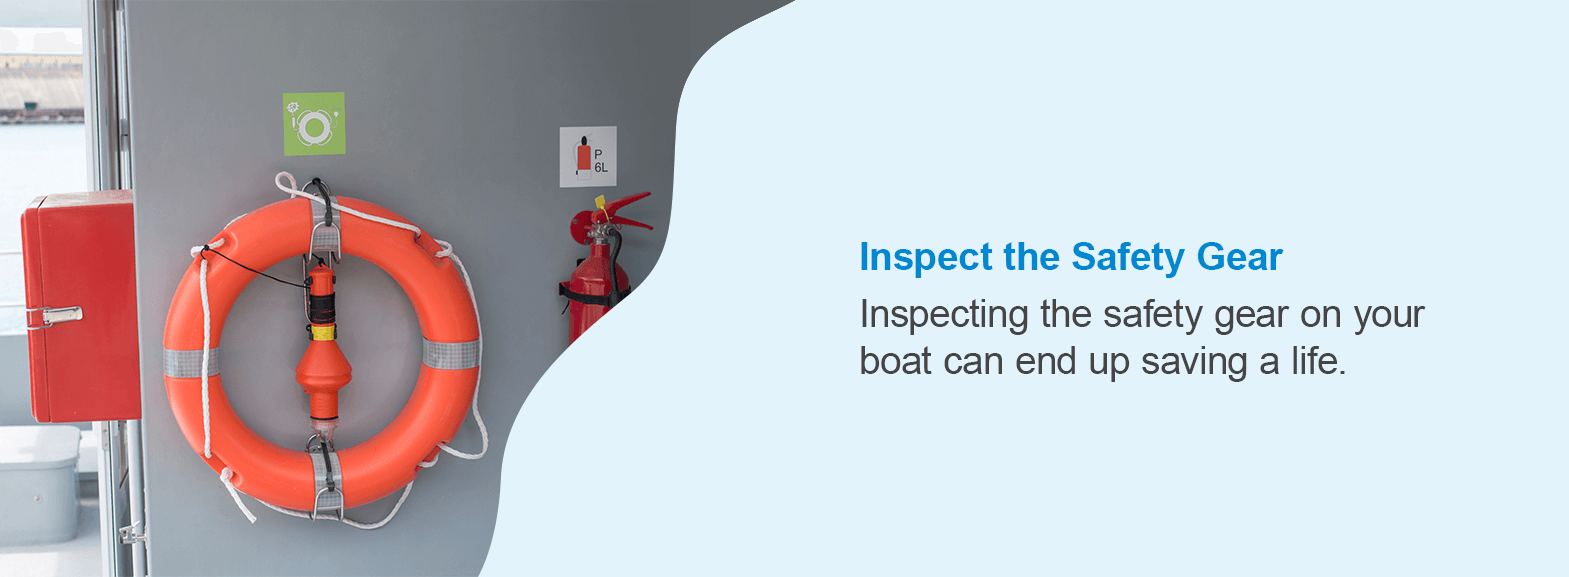 Inspect the Safety Gear. Inspecting the safety gear on your boat can end up saving a life.